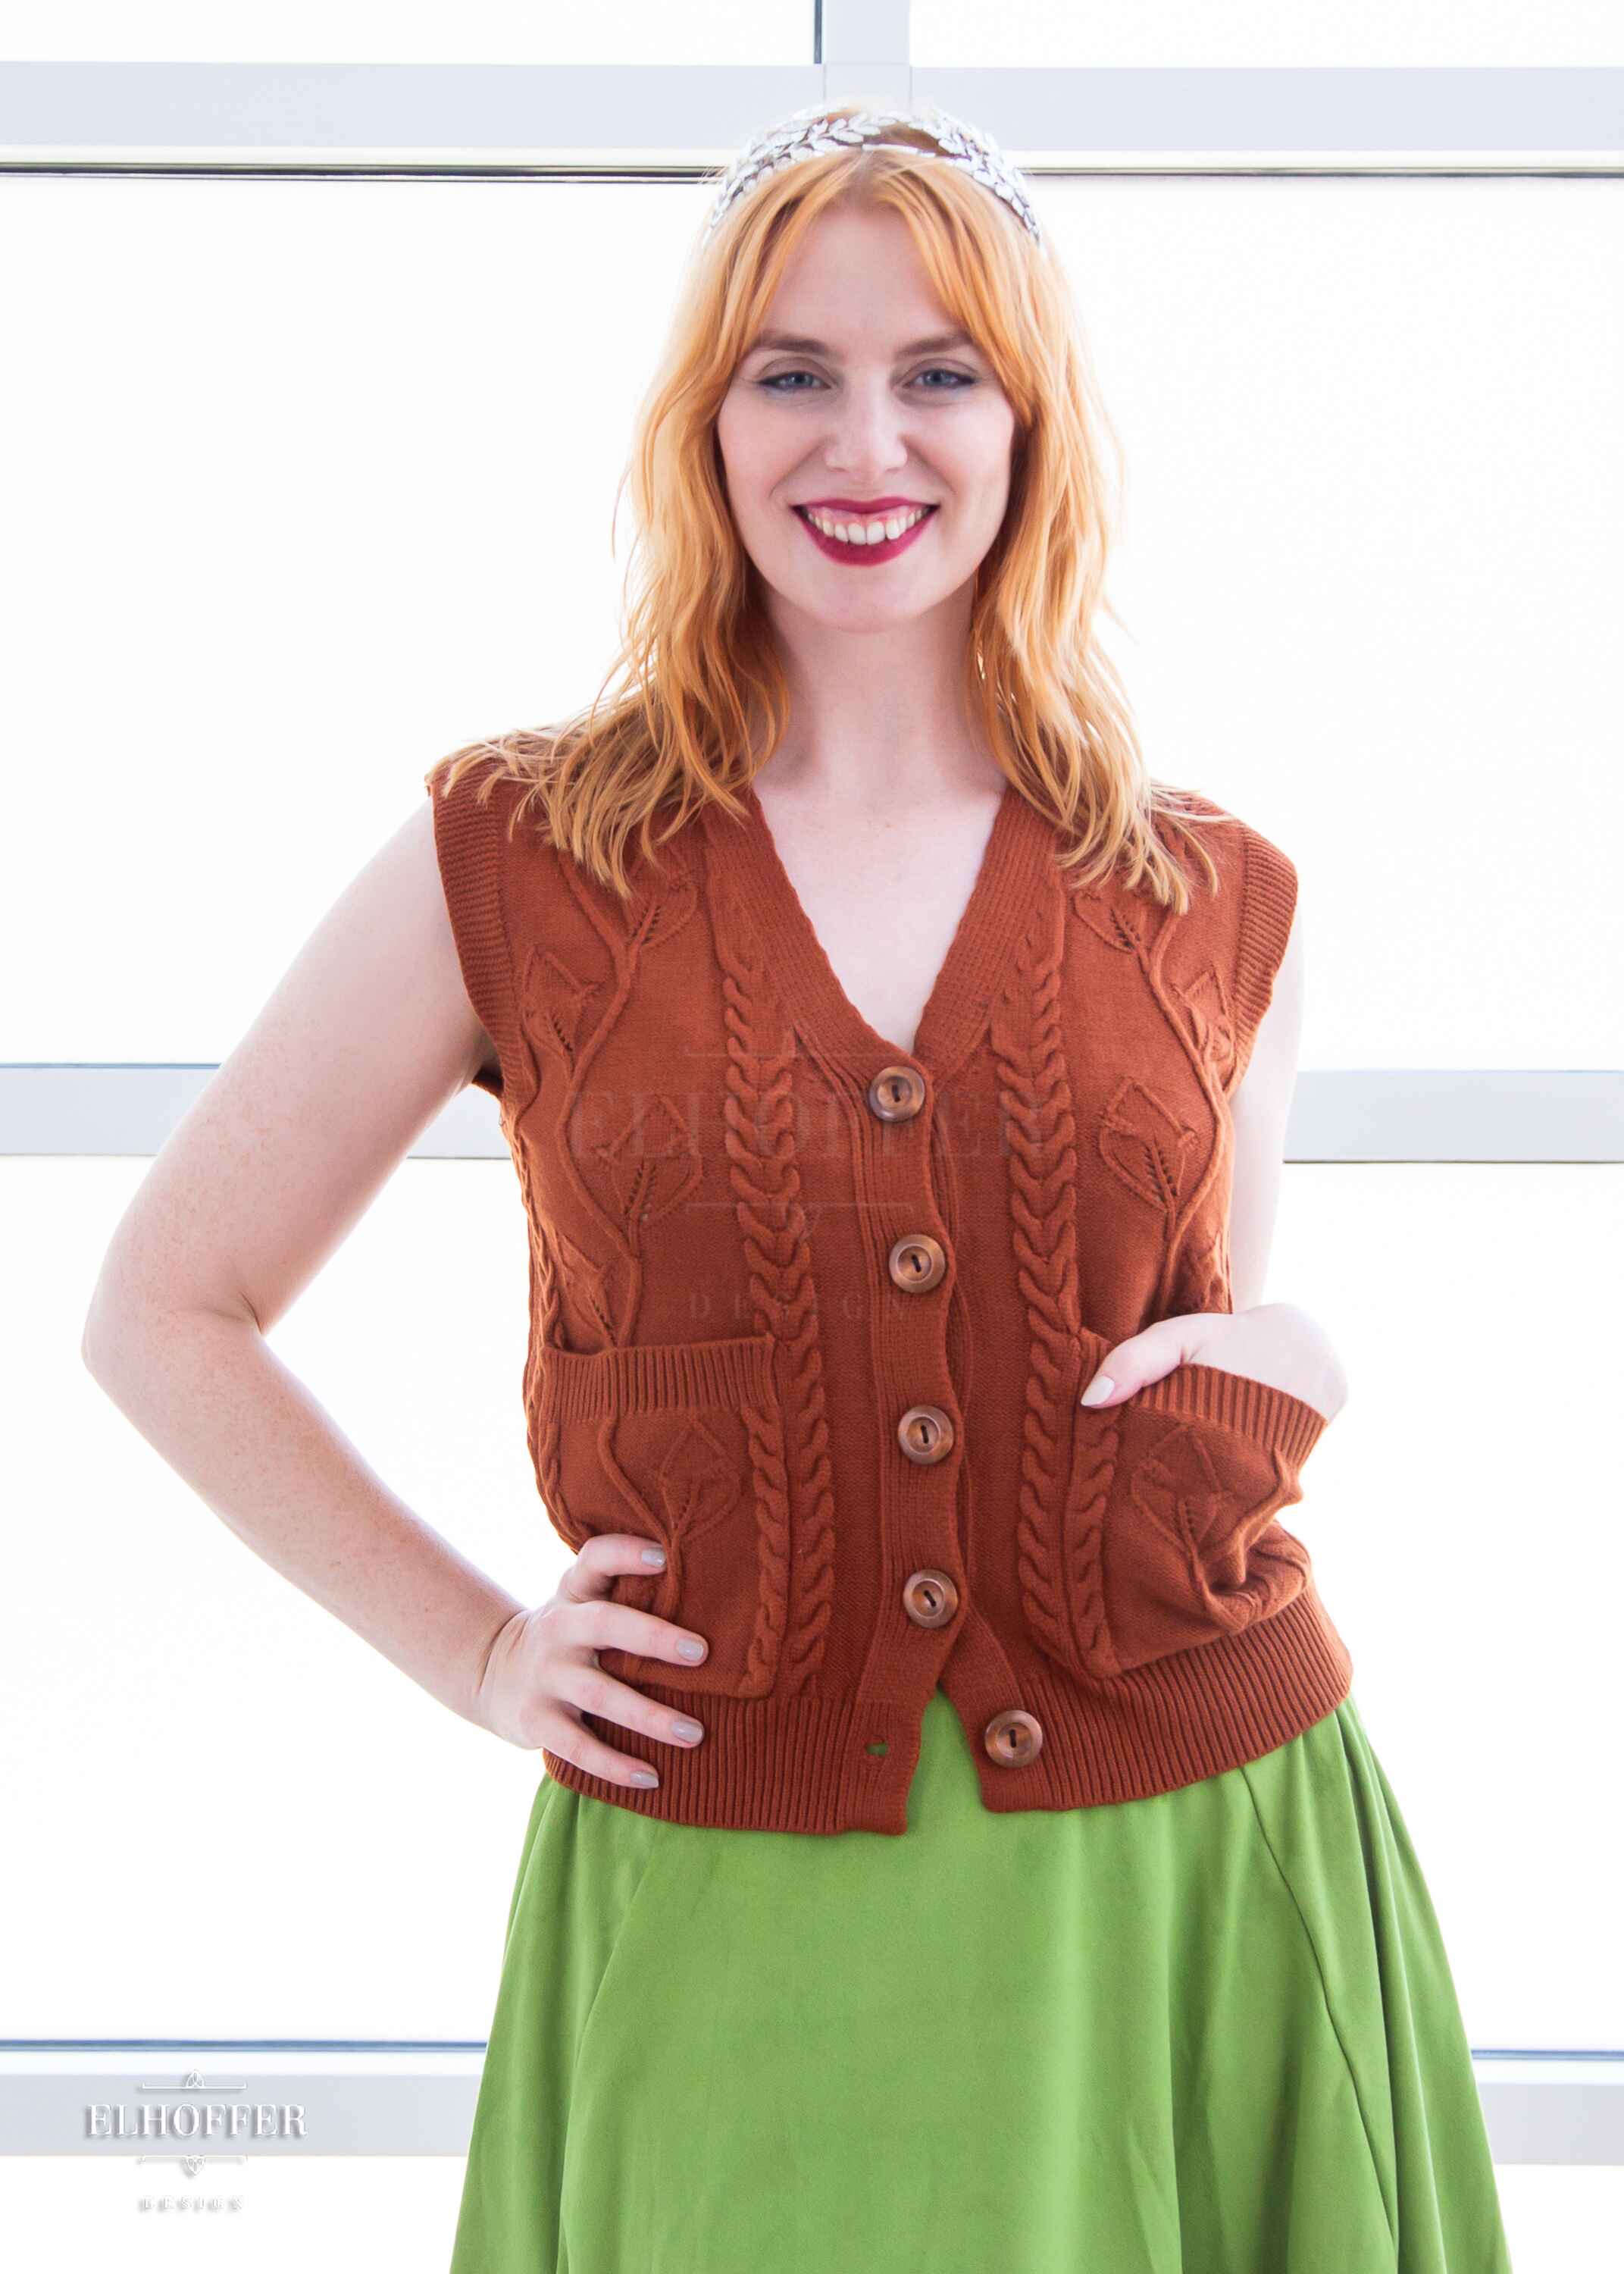 Harley, a fair skinned S model with shoulder length strawberry blonde hair, is smiling while wearing a pumpkin orange button up knit vest with a leafy vine and cable knit pattern, light brown buttons, and front pockets.